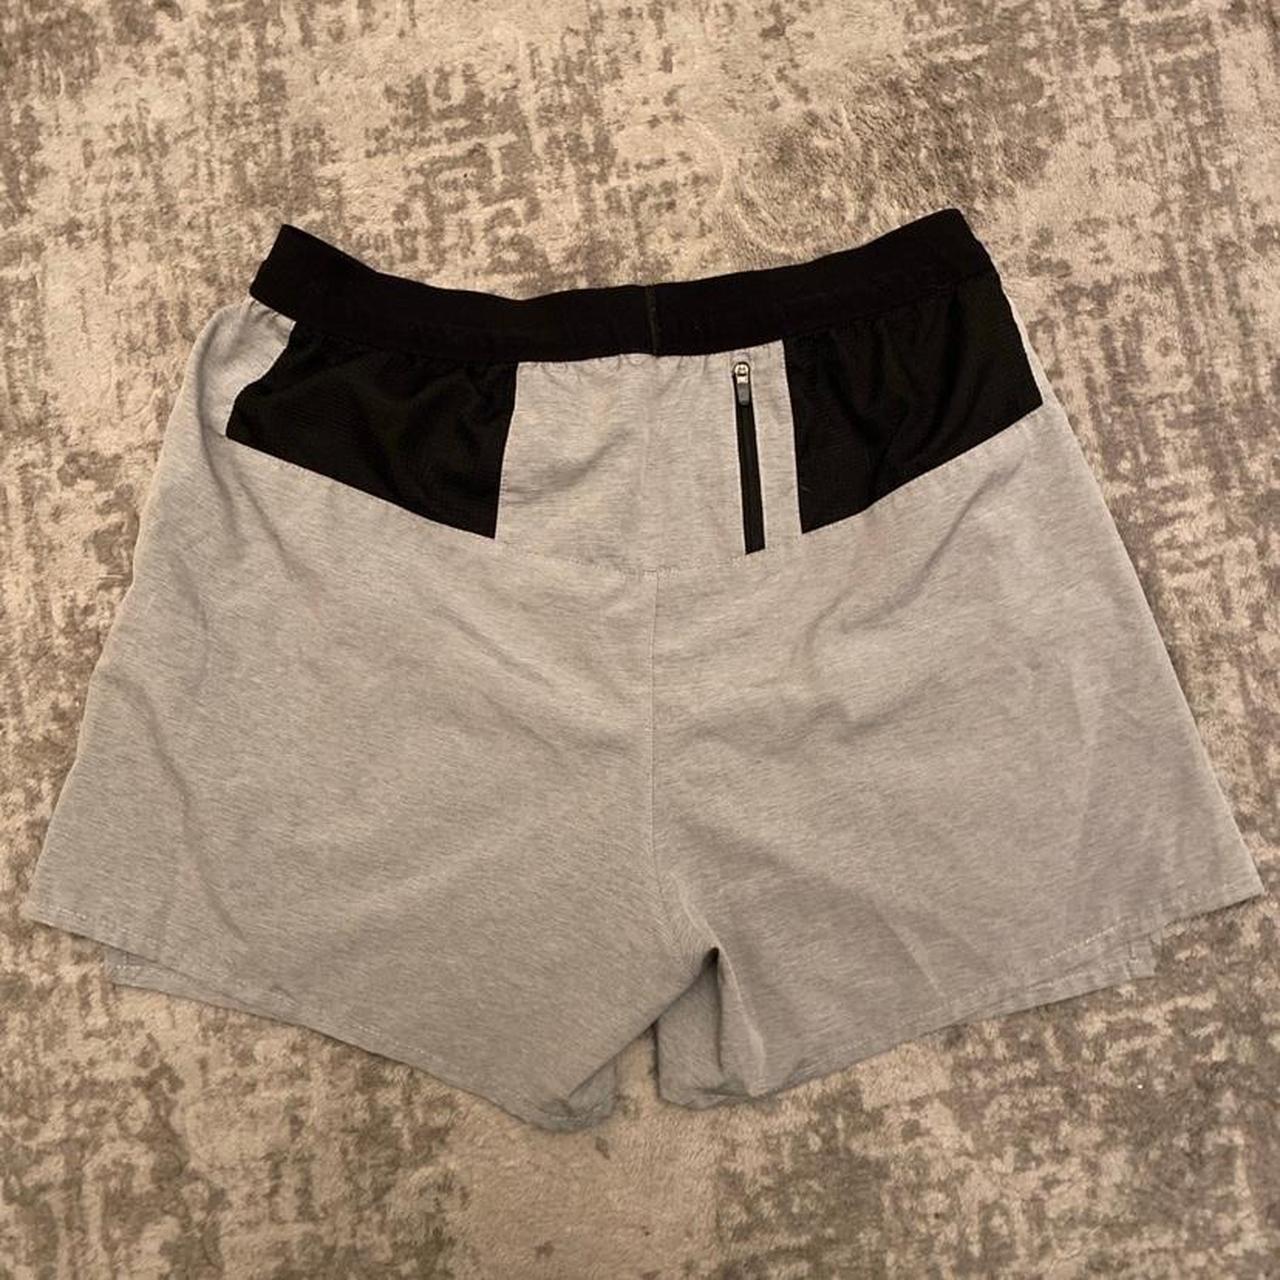 YoungLA short shorts. Only tried on once they are - Depop